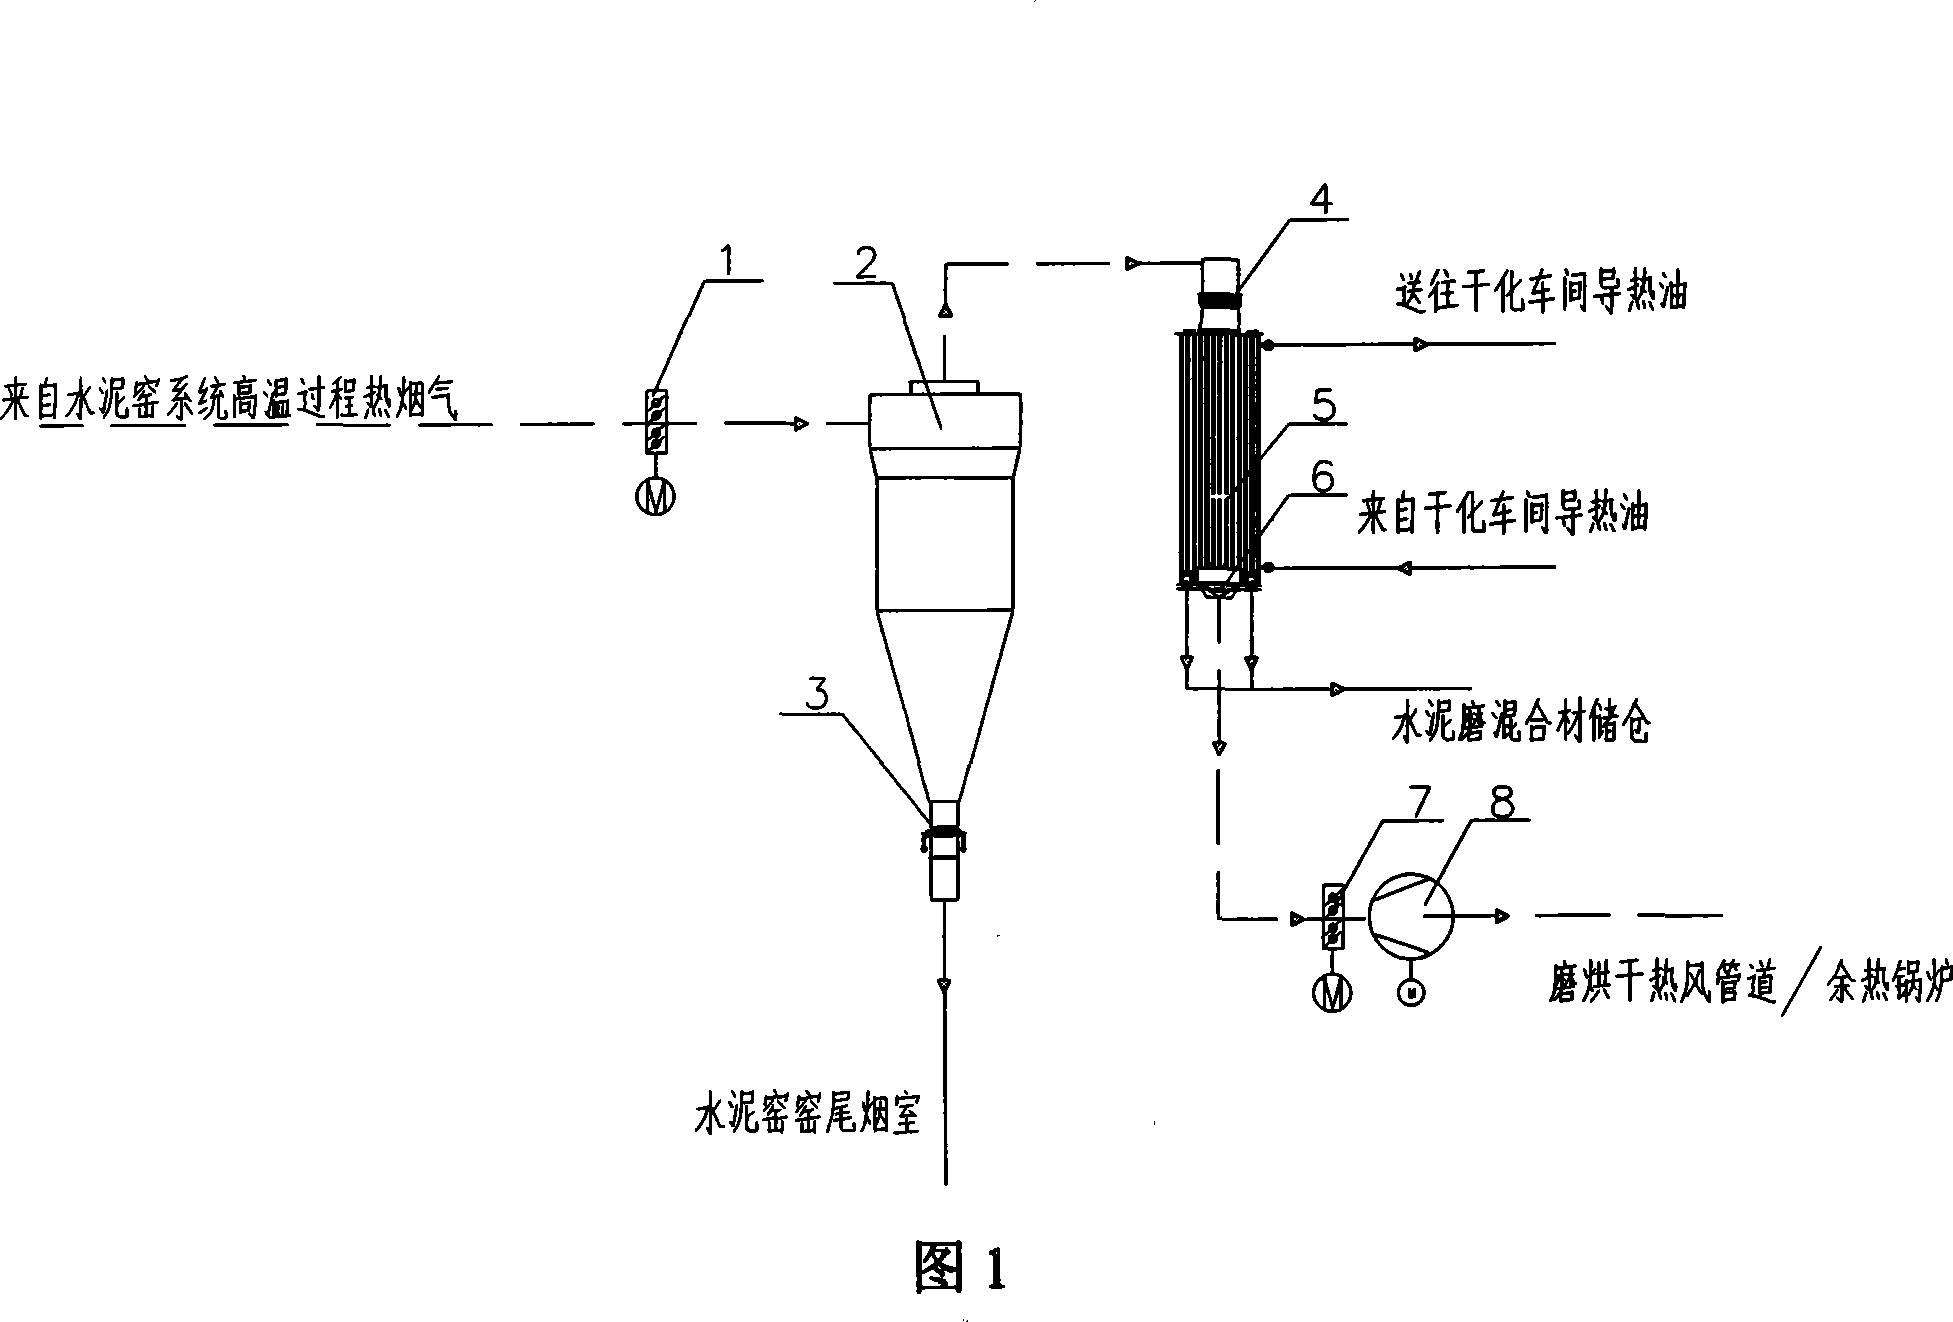 Method for exchanging heat using cement kiln high-temperature flue gas as heat source